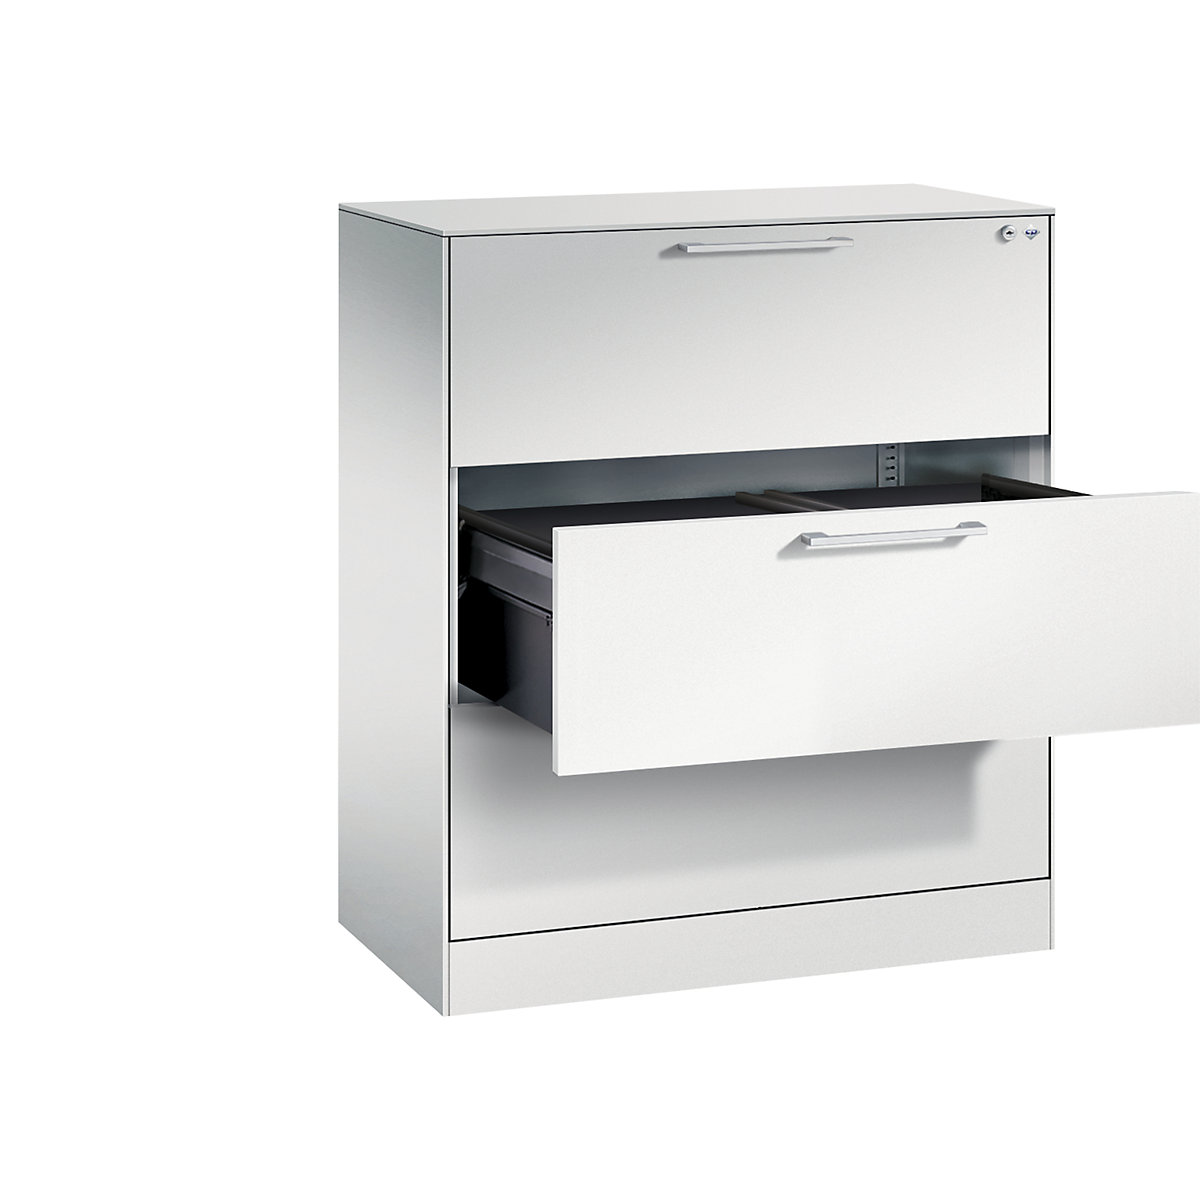 ASISTO suspension filing cabinet – C+P, width 800 mm, with 3 drawers, light grey/light grey-7